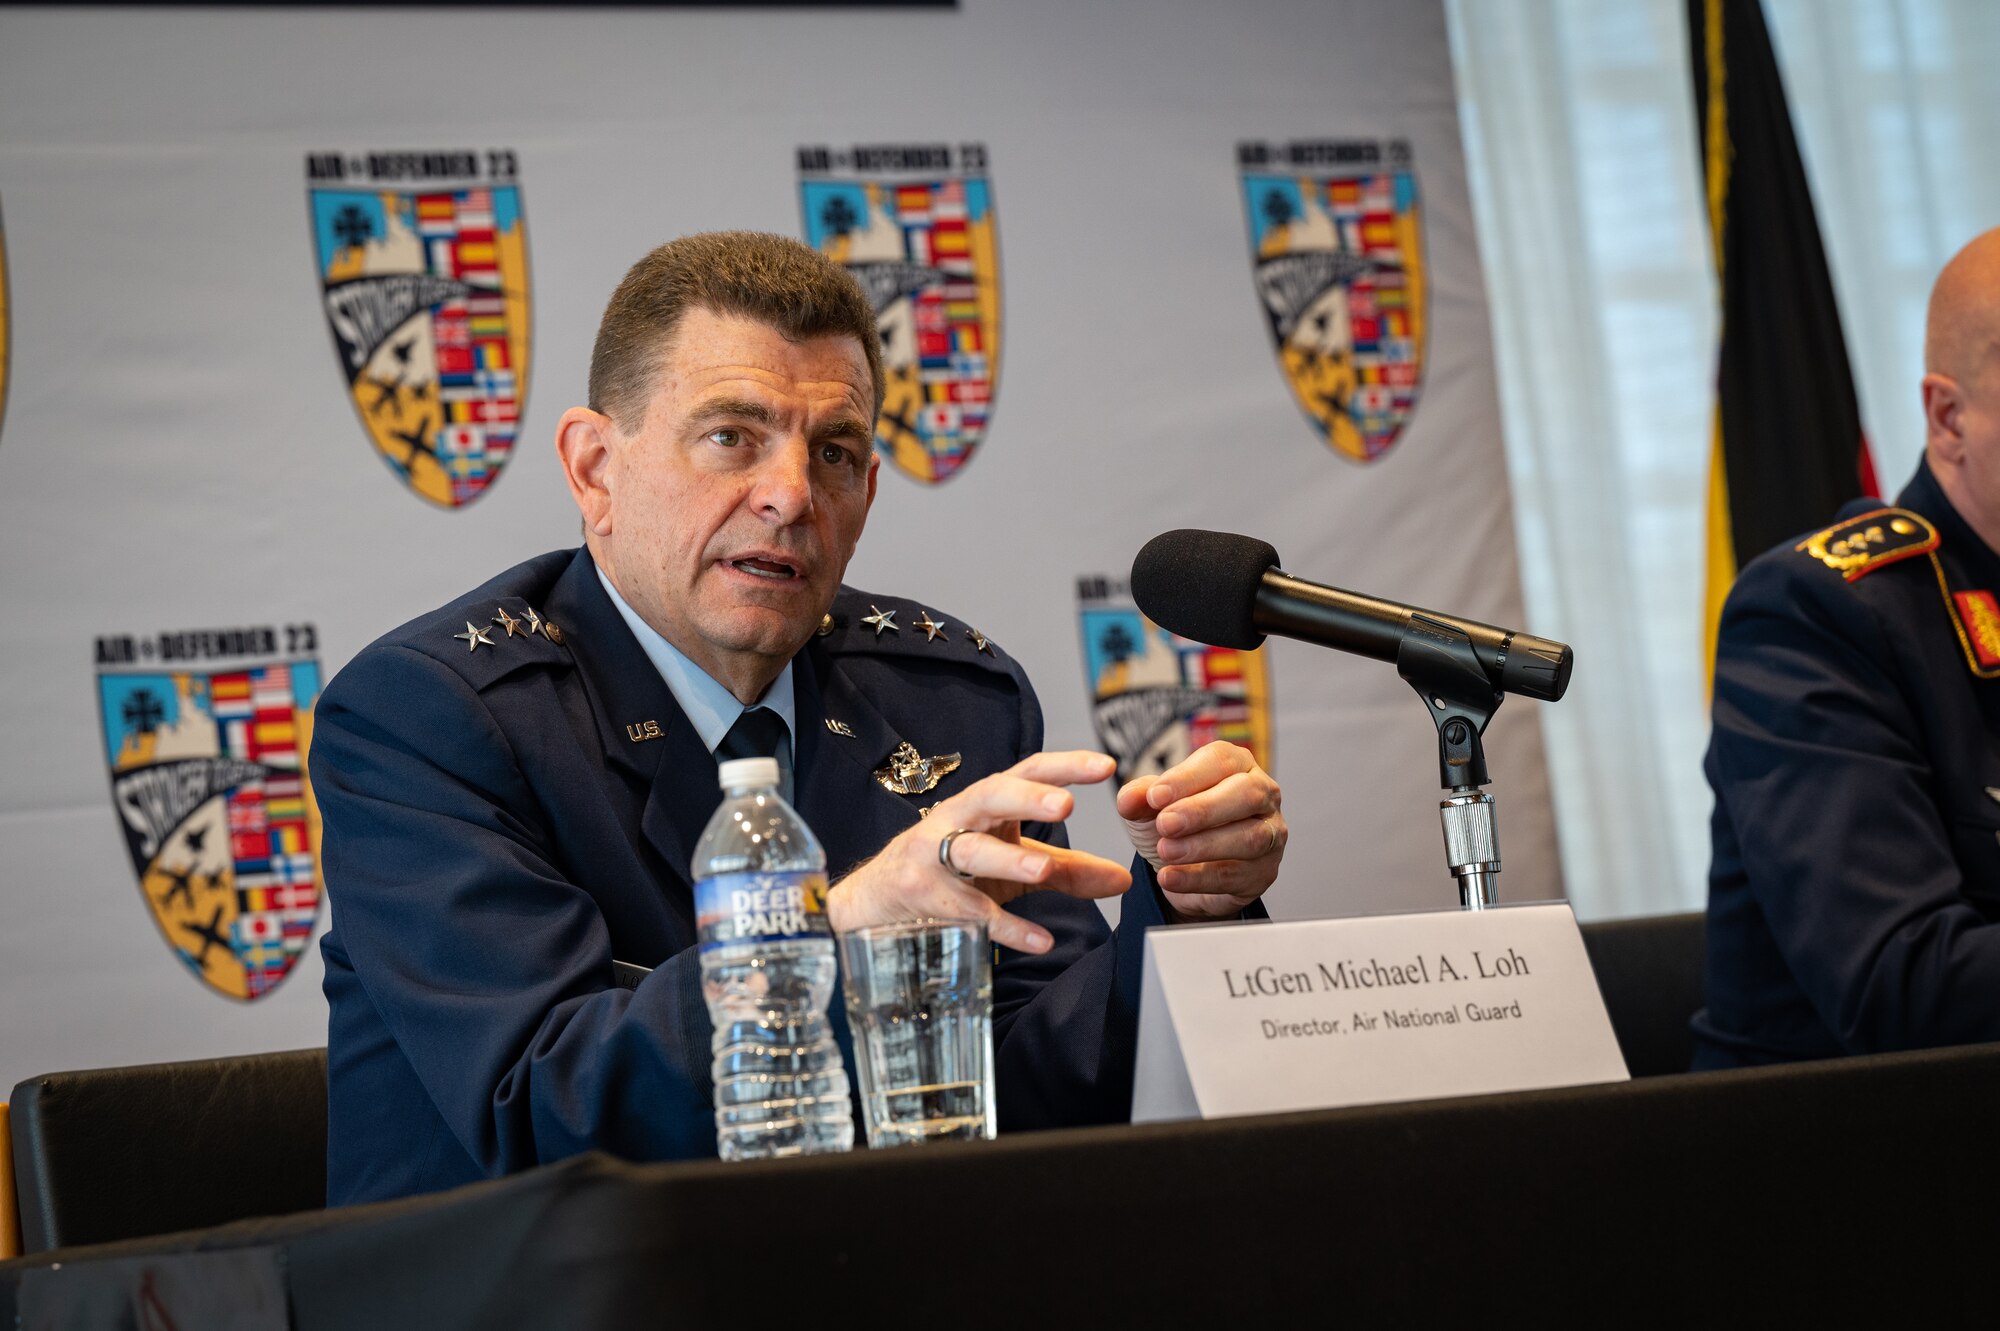 U.S. Air Force Lt. Gen. Michael A. Loh, left, director, Air National Guard, speaks at a press conference highlighting Air Defender 2023 at the German Embassy in Washington, D.C., April 4, 2023.